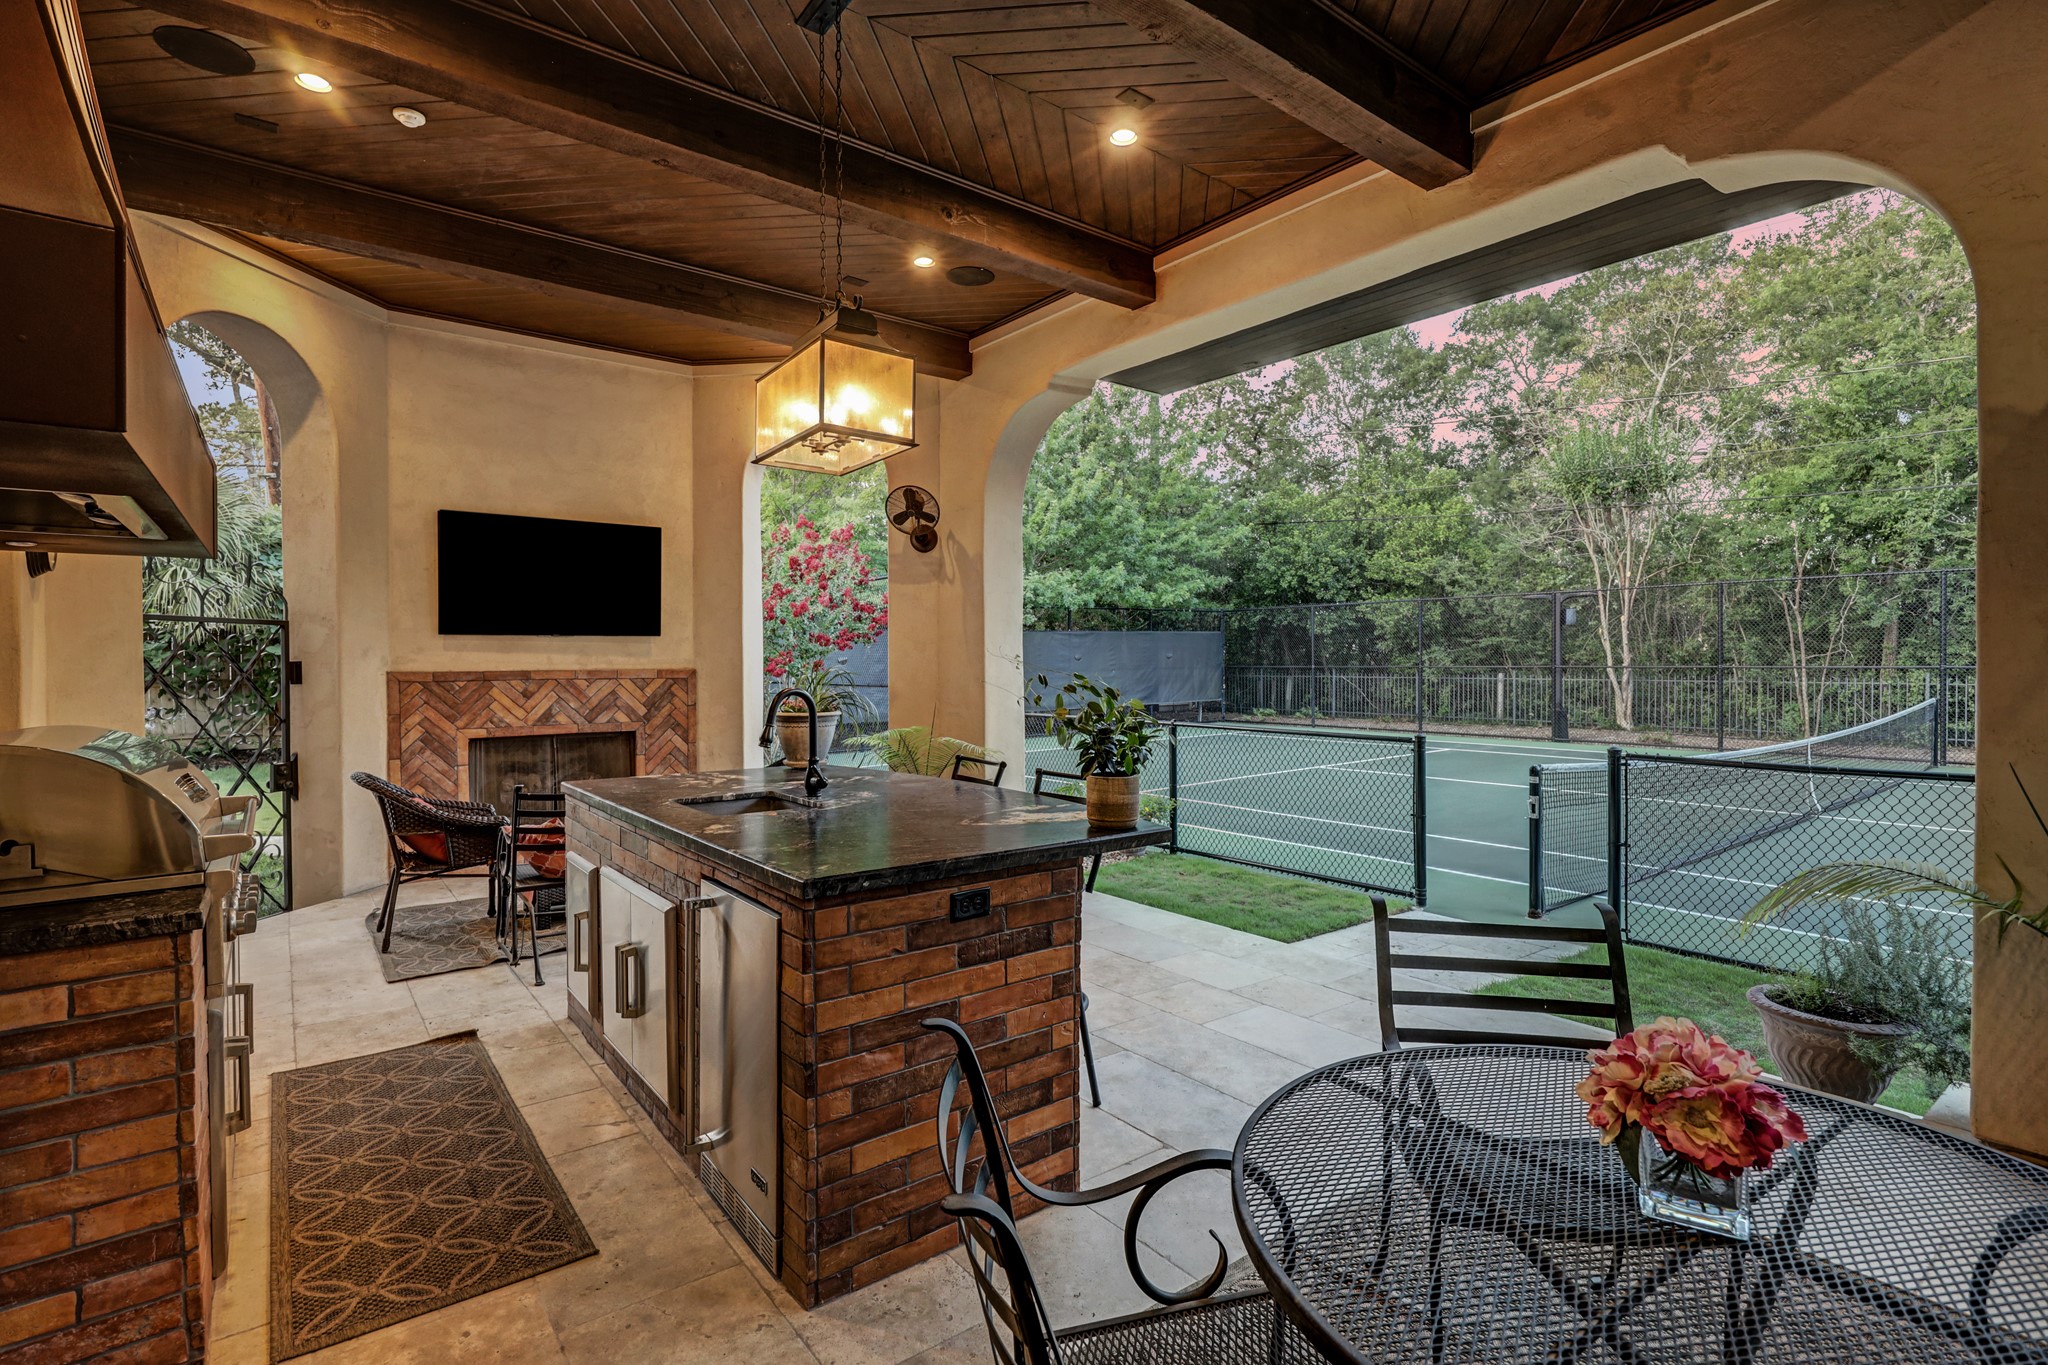 Resort-style outdoor entertainers space includes the fully equipped summer kitchen, fireplace and facing tennis court